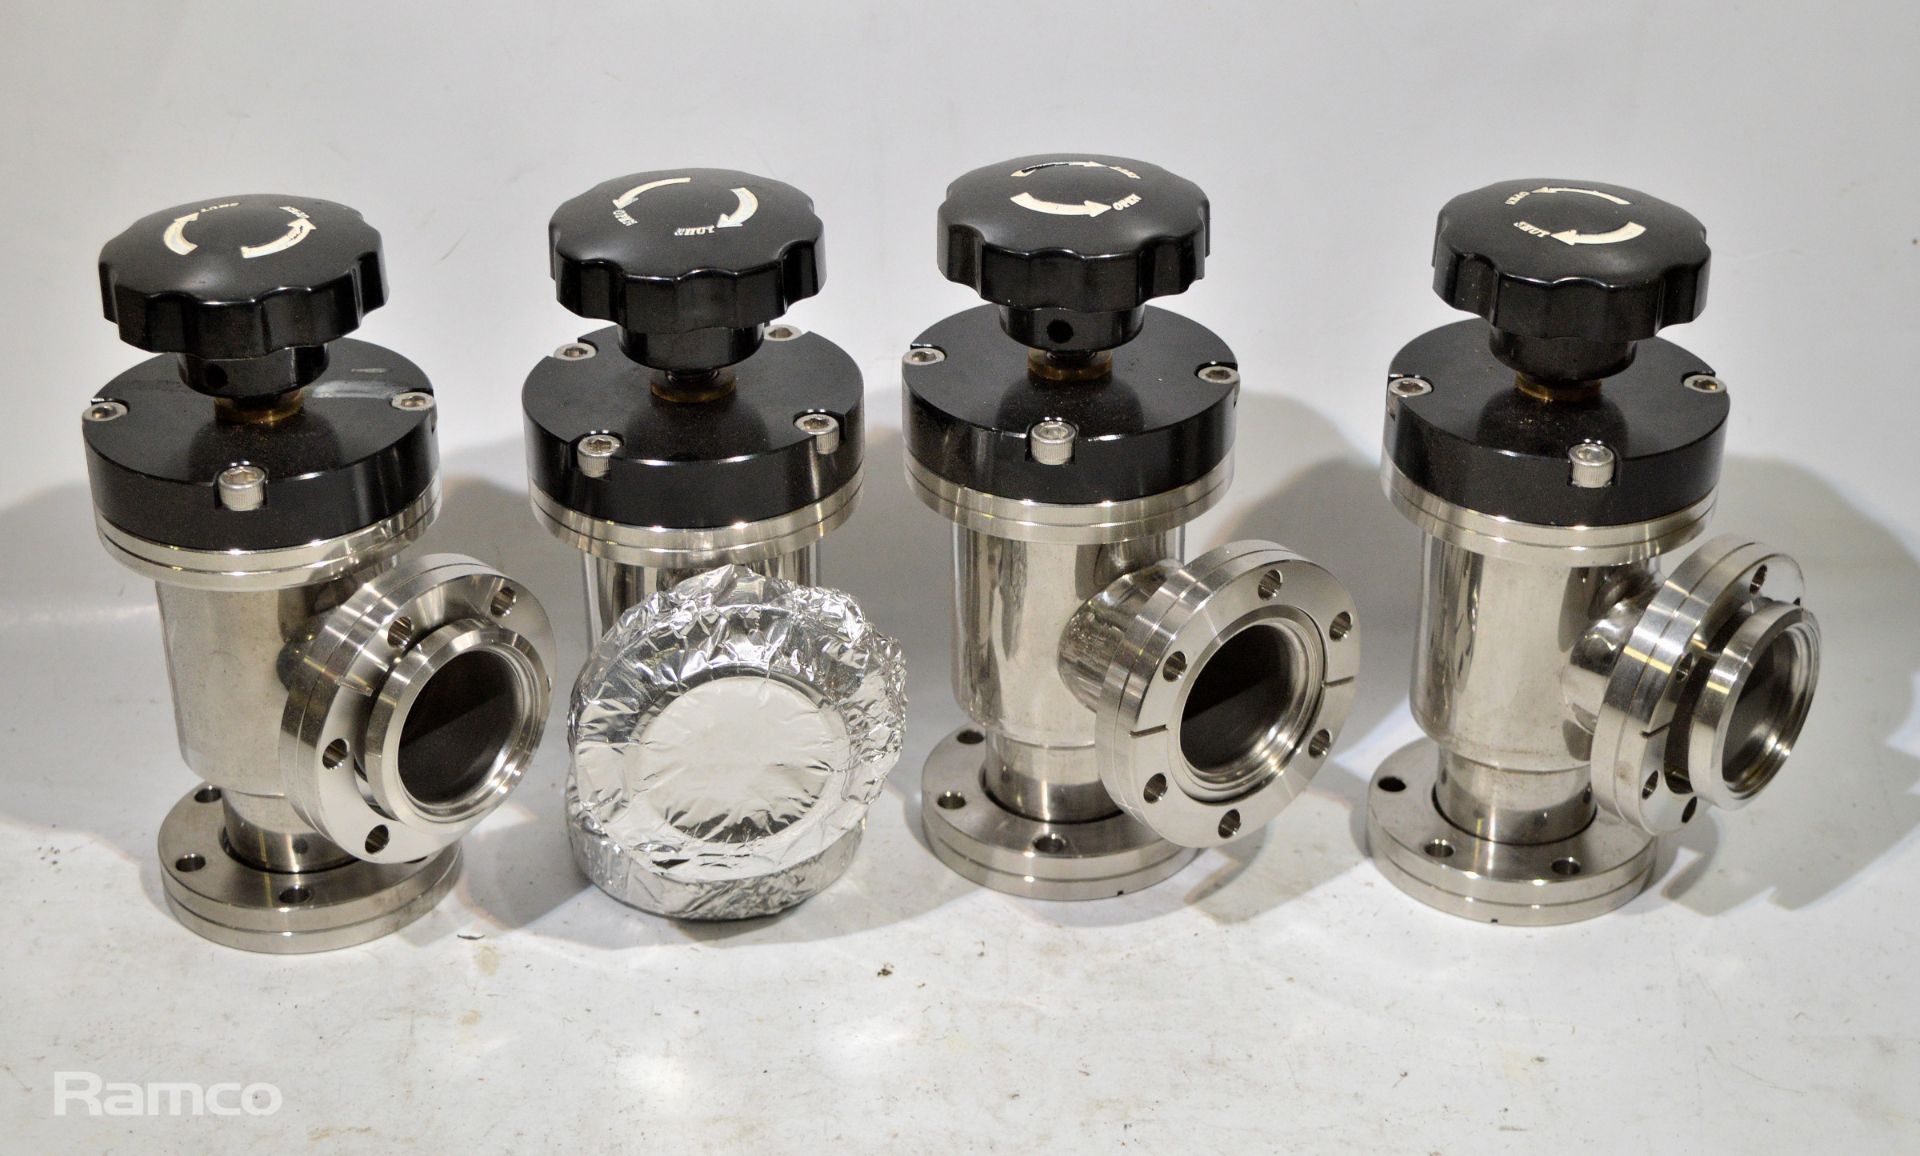 4x Scanwell Conflat Bellows Vacuum Valves